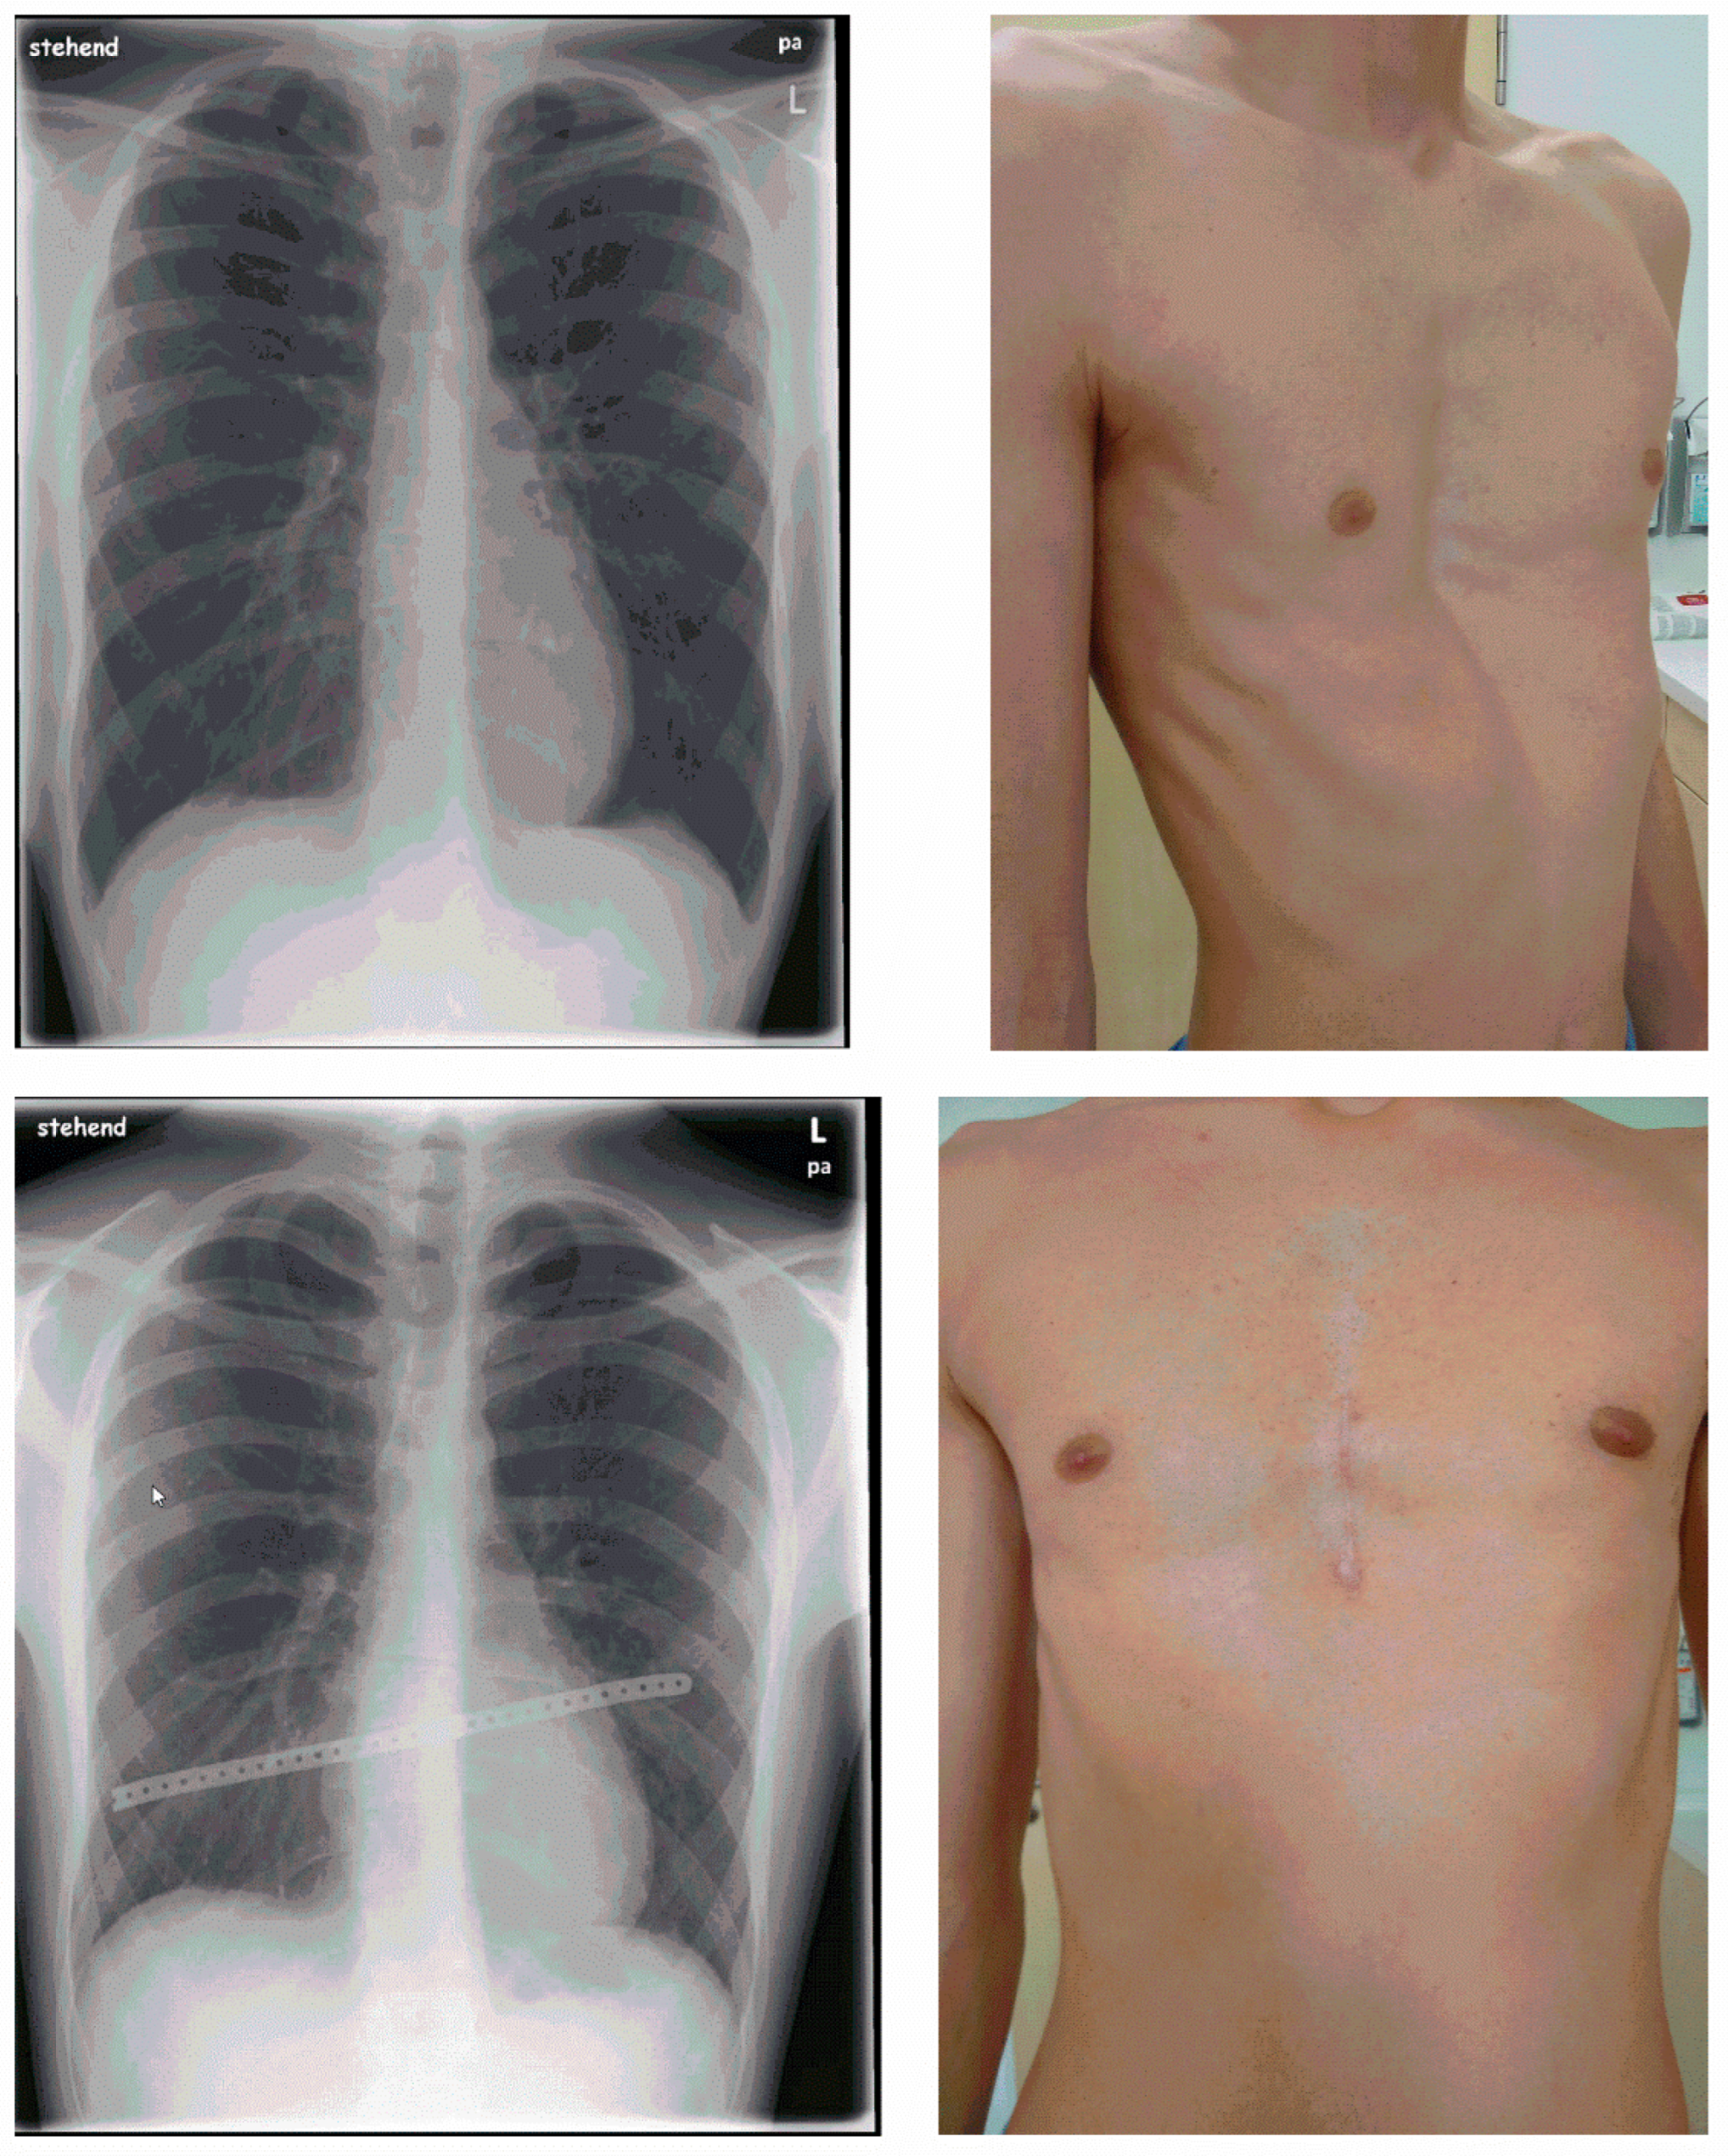 Applied Sciences | Free Full-Text | Minimalized Erlangen Correction Method  by H&uuml;mmer (MEK) Compared with Conventional and Minimally Invasive  Correction Methods for Pectus Excavatum Single Center Experience